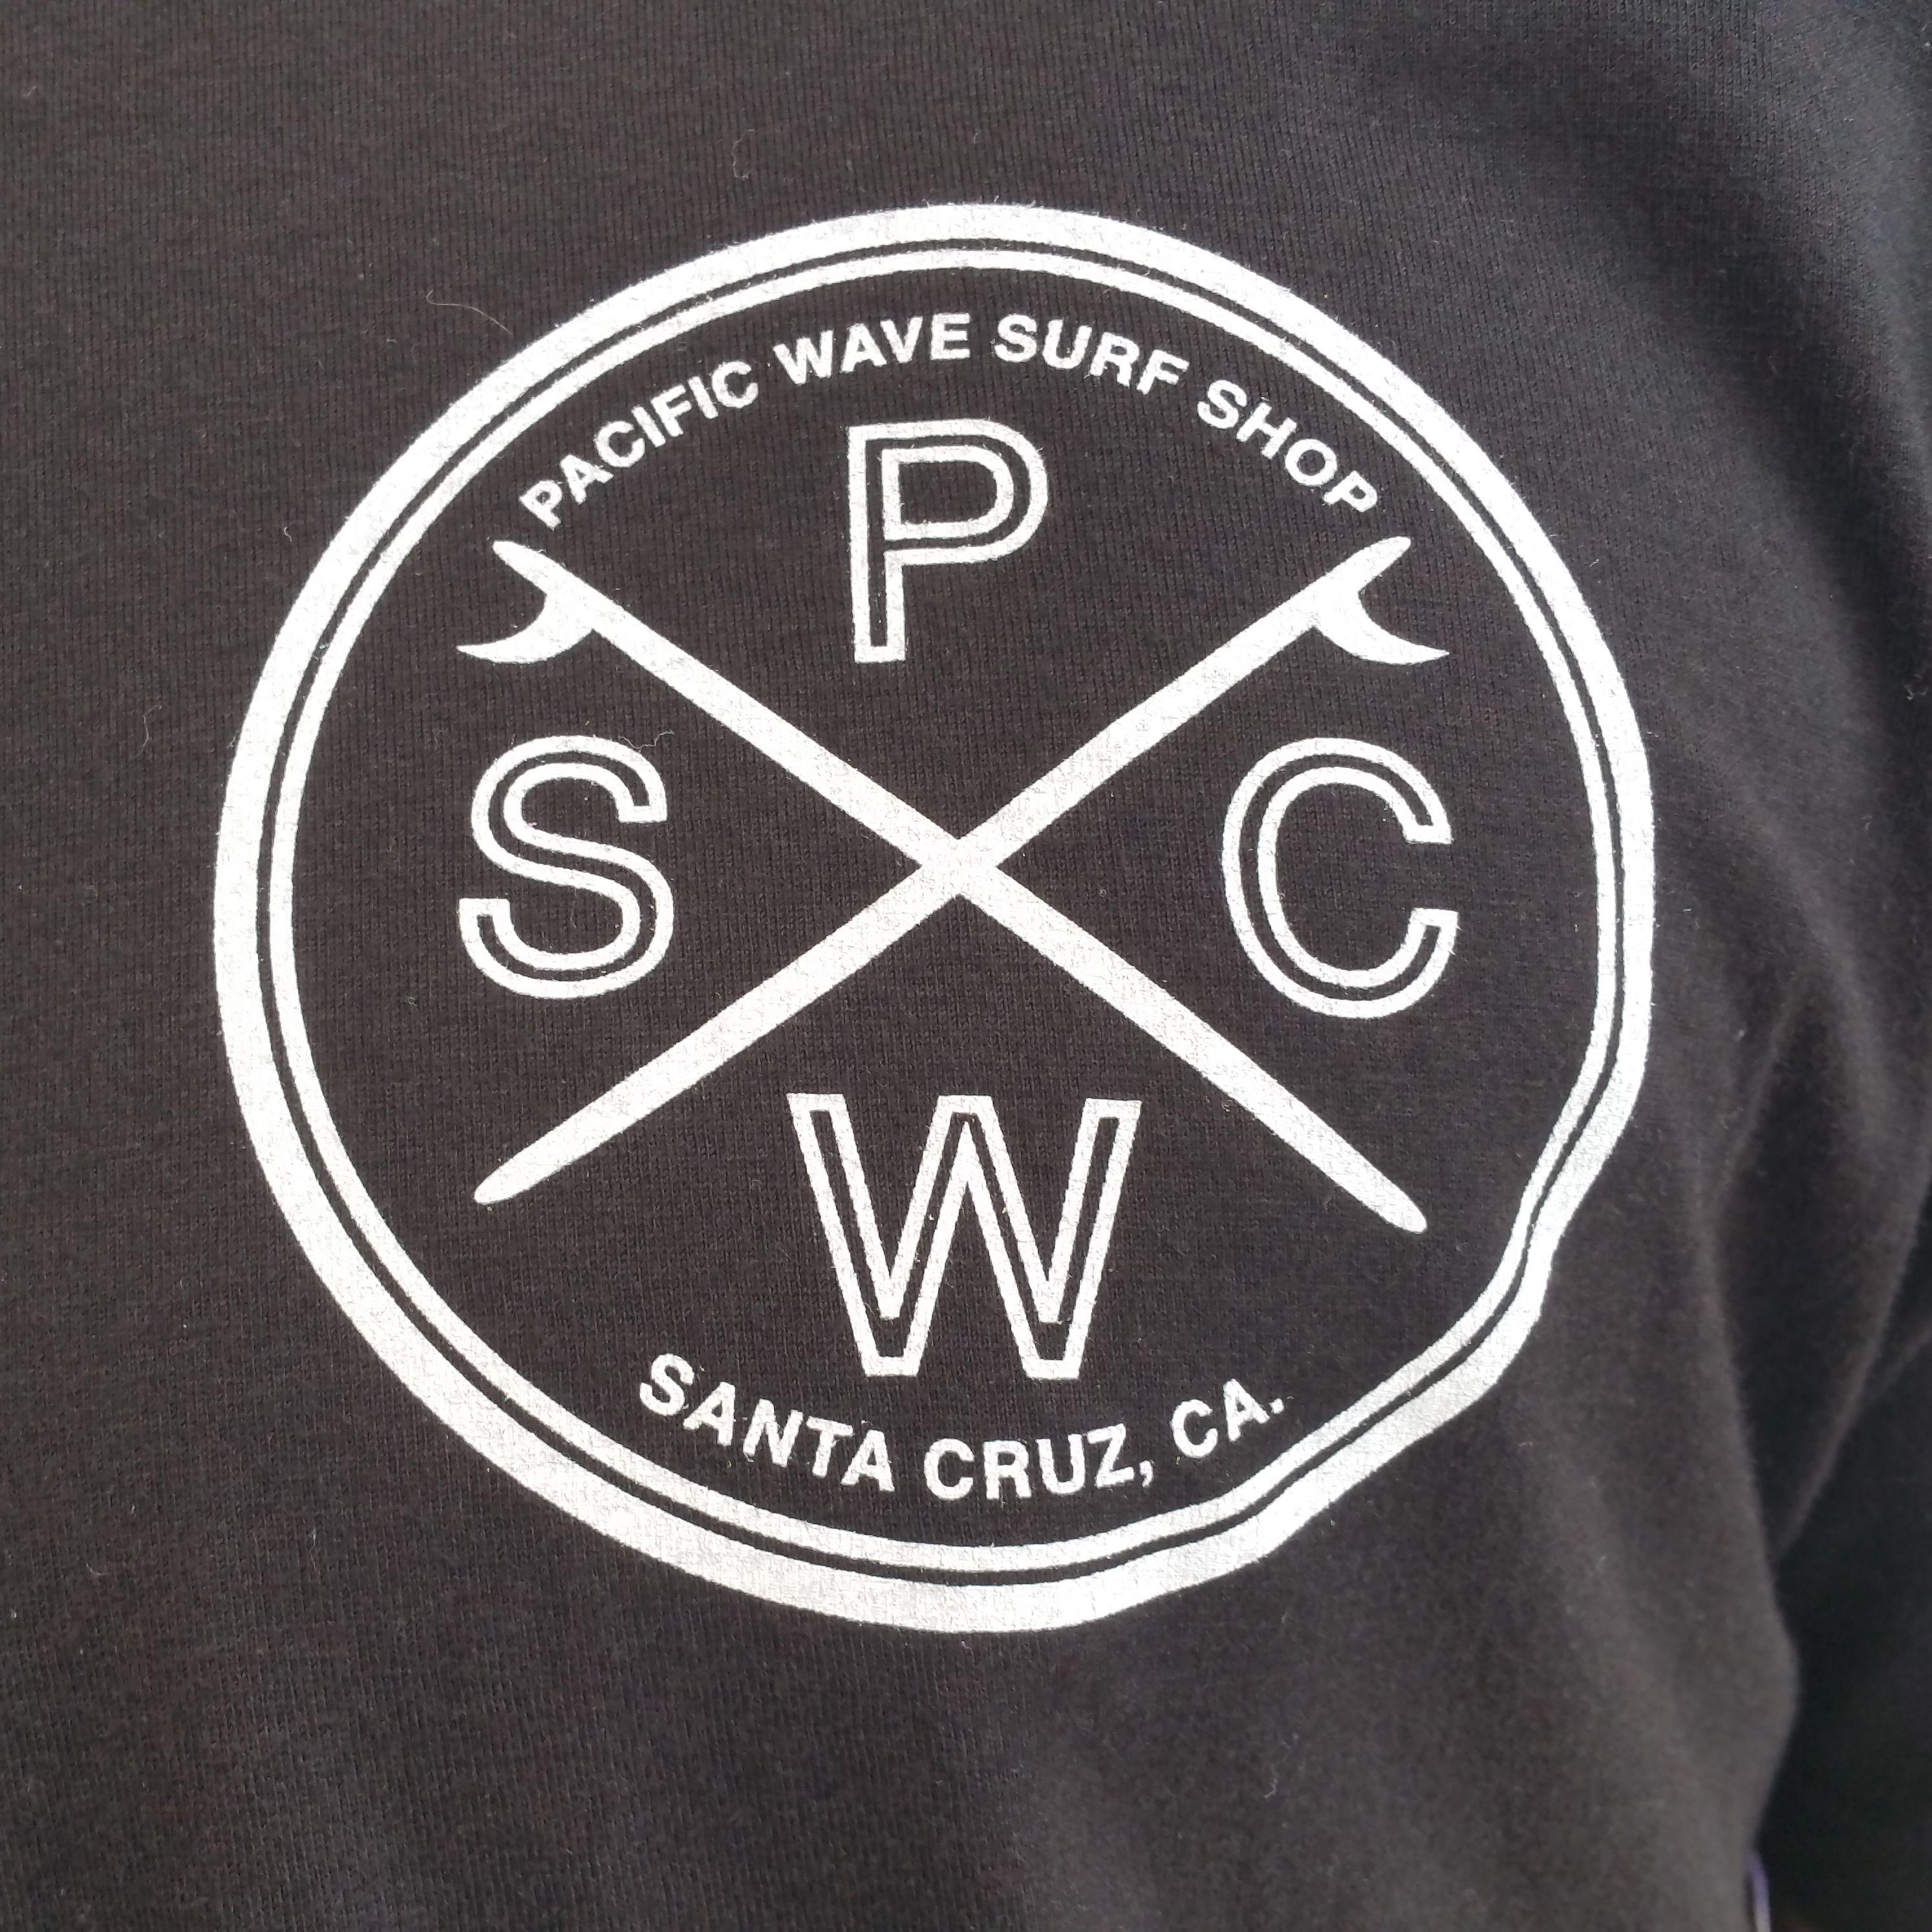 Surf Club Logo - Pacific Wave Surf Club Fitted T Shirt Men's Black Wave Surf